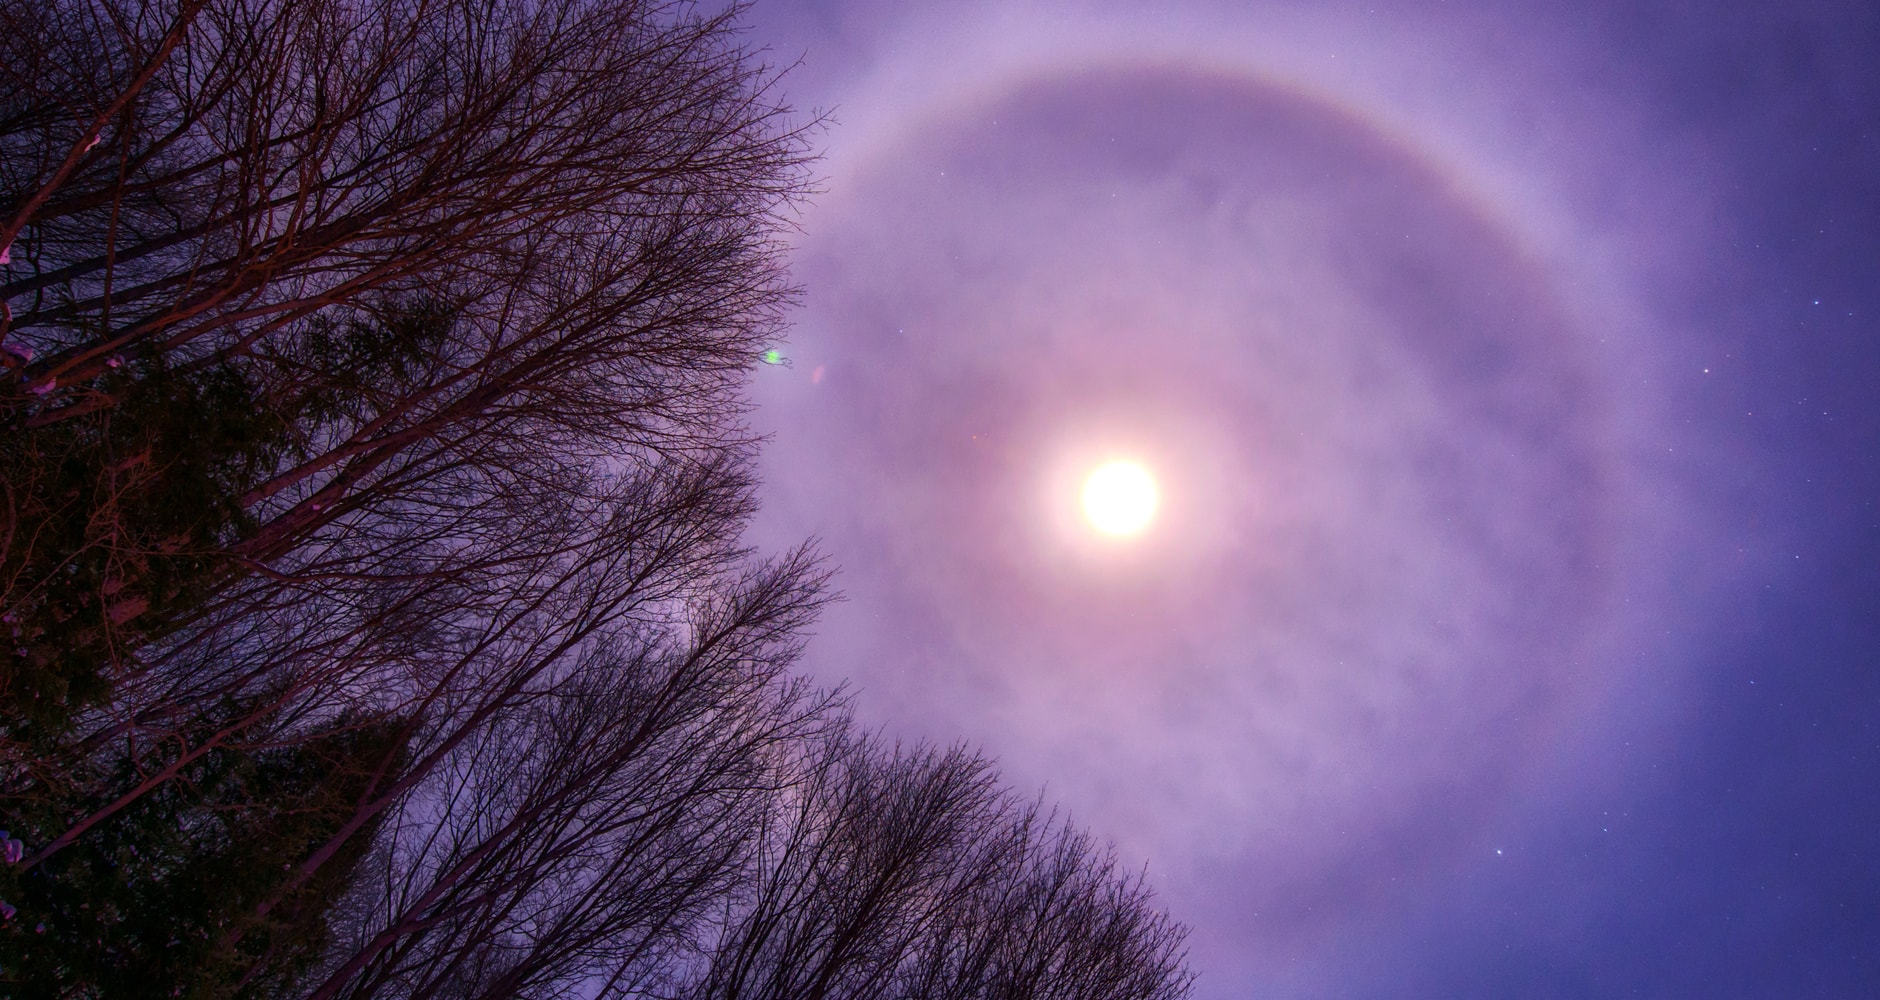 A ring around the Moon (Moon halo).